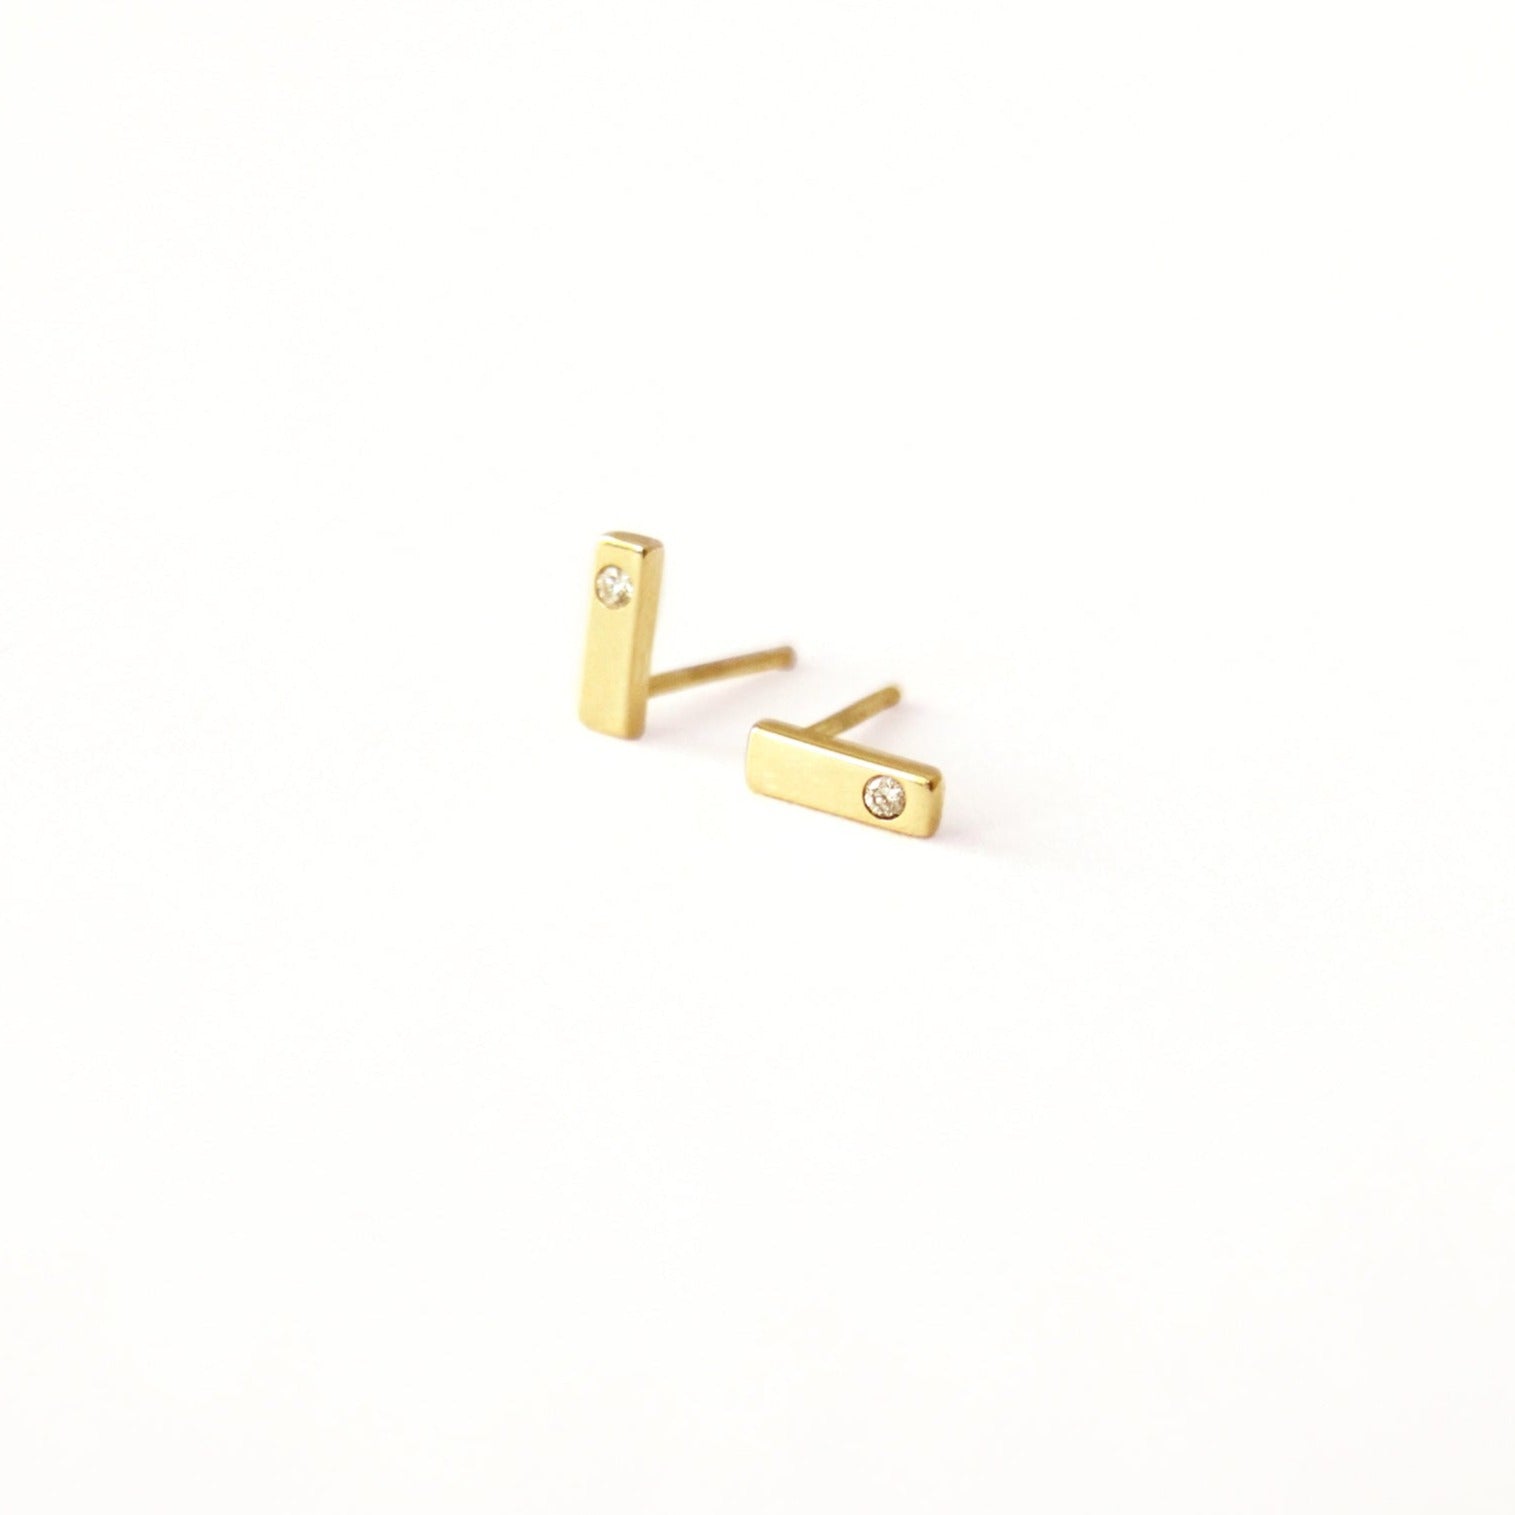 Solid gold bar stud earring with a tiny 2mm diamond. Light tiny earrings that will go with any outfit. Easy to wear everyday.